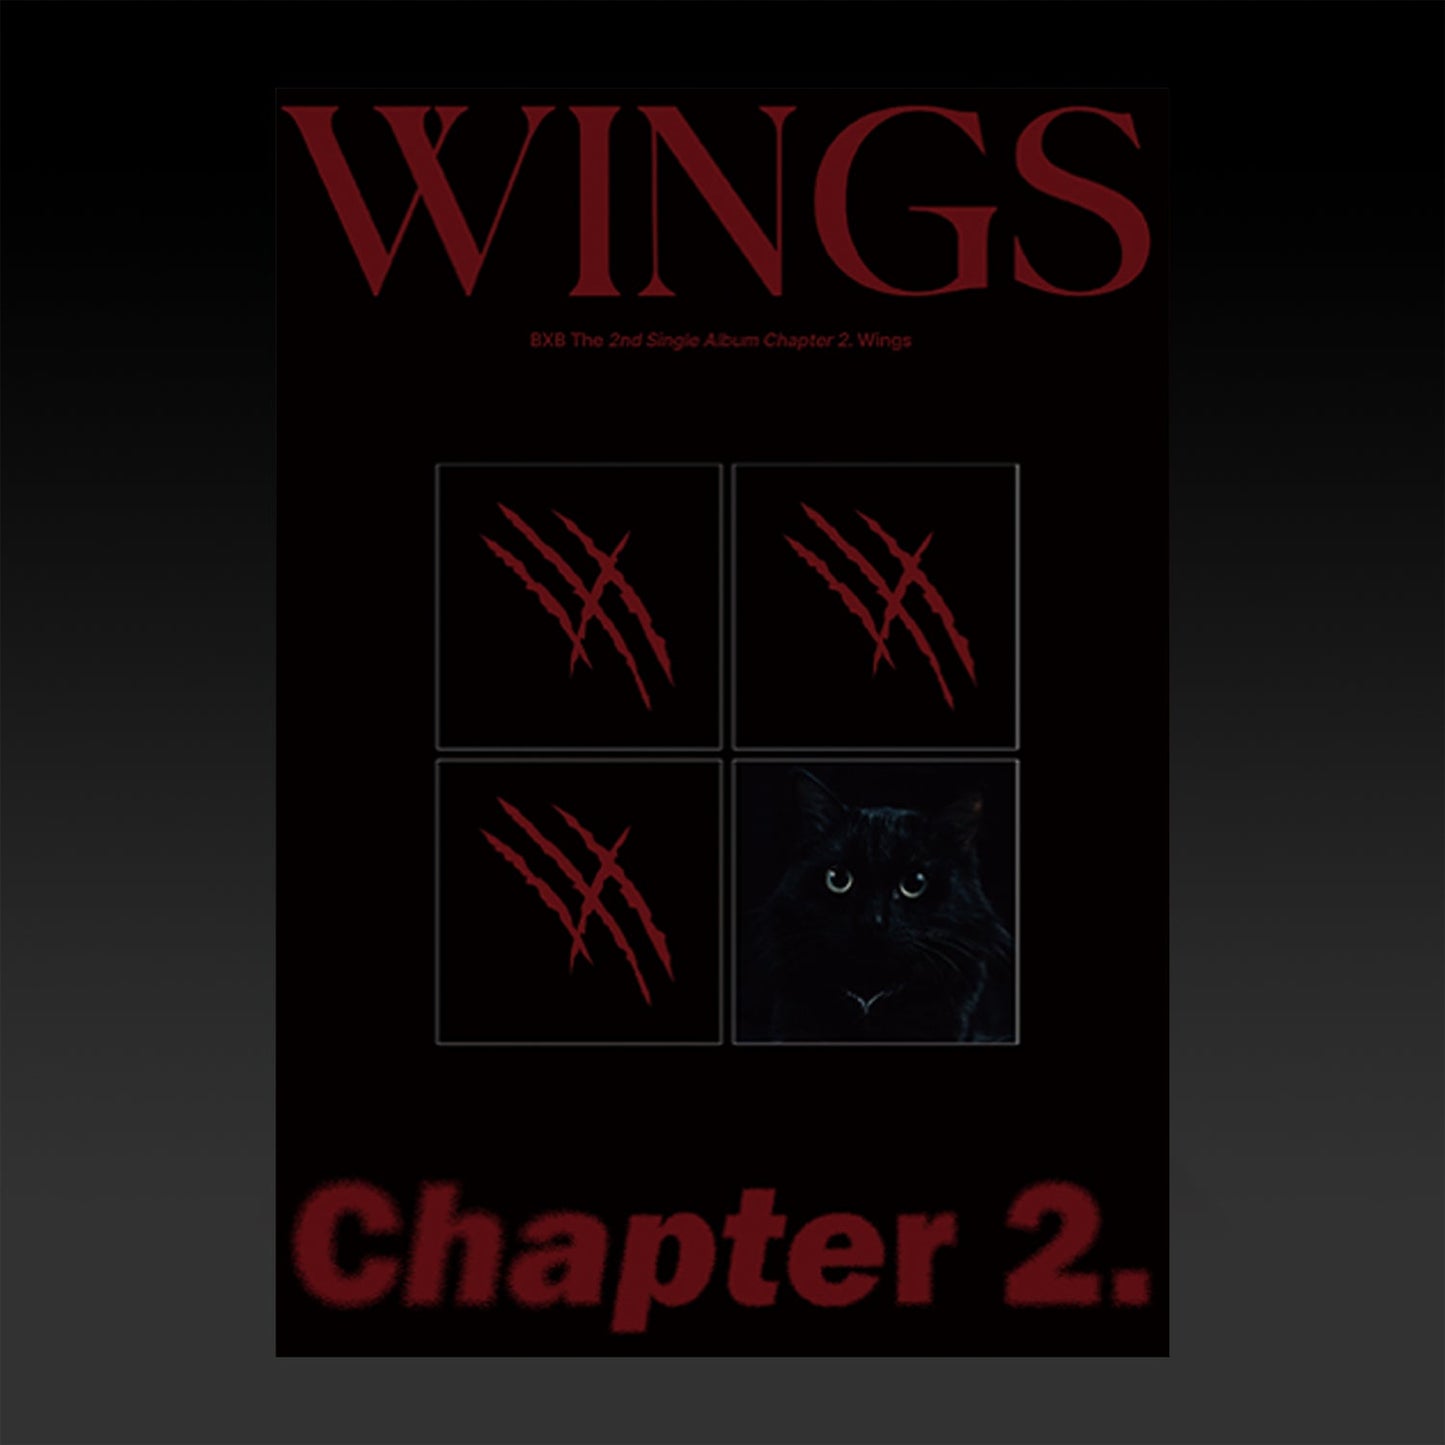 BXB 2ND SINGLE ALBUM 'CHAPTER 2. WINGS' NIGHT VERSION COVER